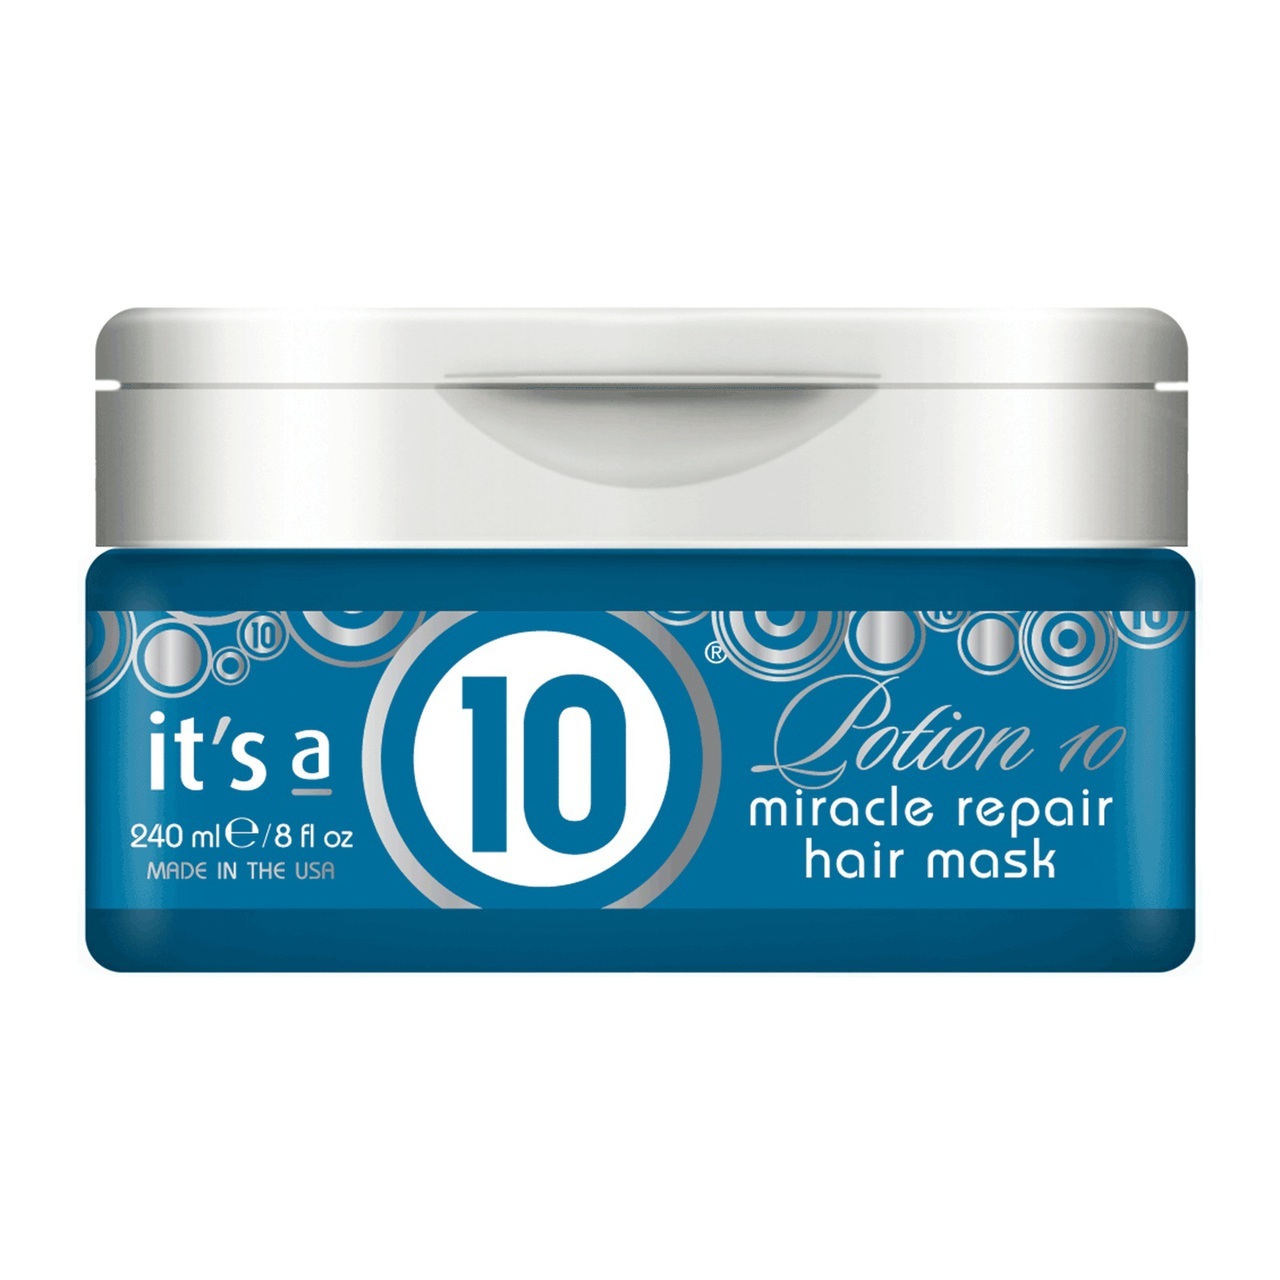 It's A 10 Potion 10 Miracle Repair Mask 8oz